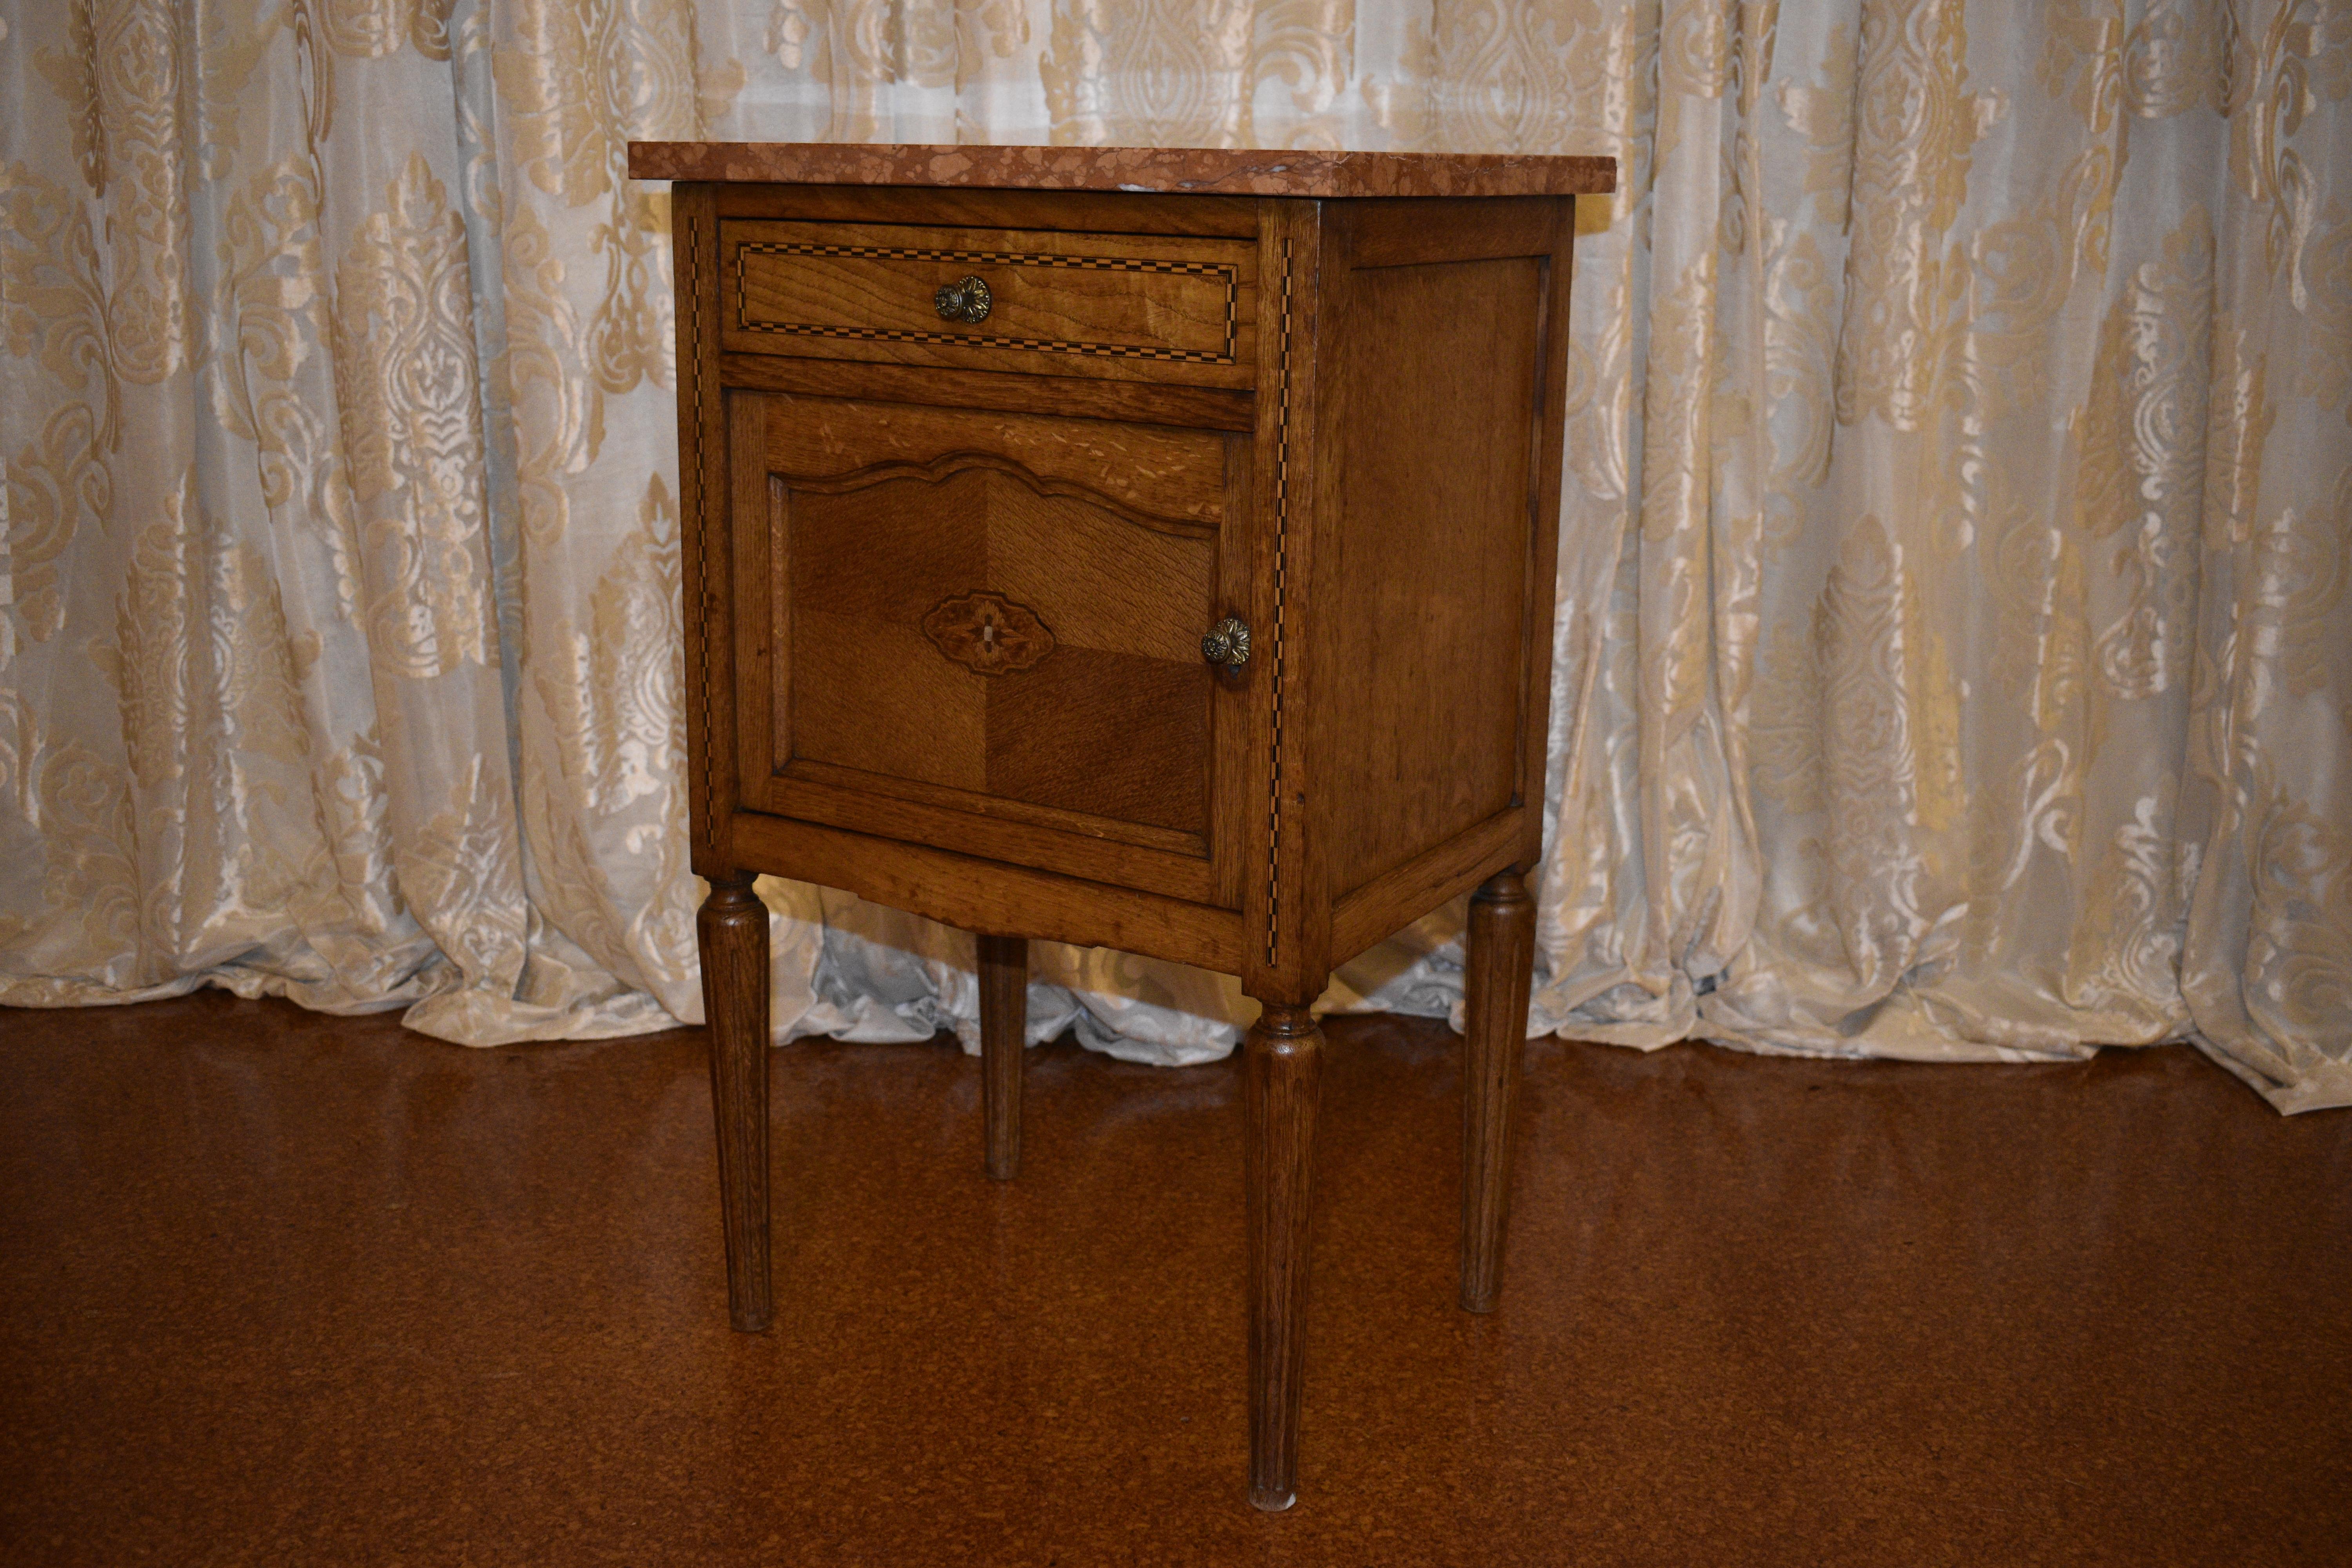 Marquetry inlay with mother of pearl centre, brass handles, marble top and tapered reeded legs. Tumbridge ware detail to cabinet.

Circa: 1890

Material: Oak and Marble

Country of Origin: France

Measurements: 74cm high, 46cm width, 35cm